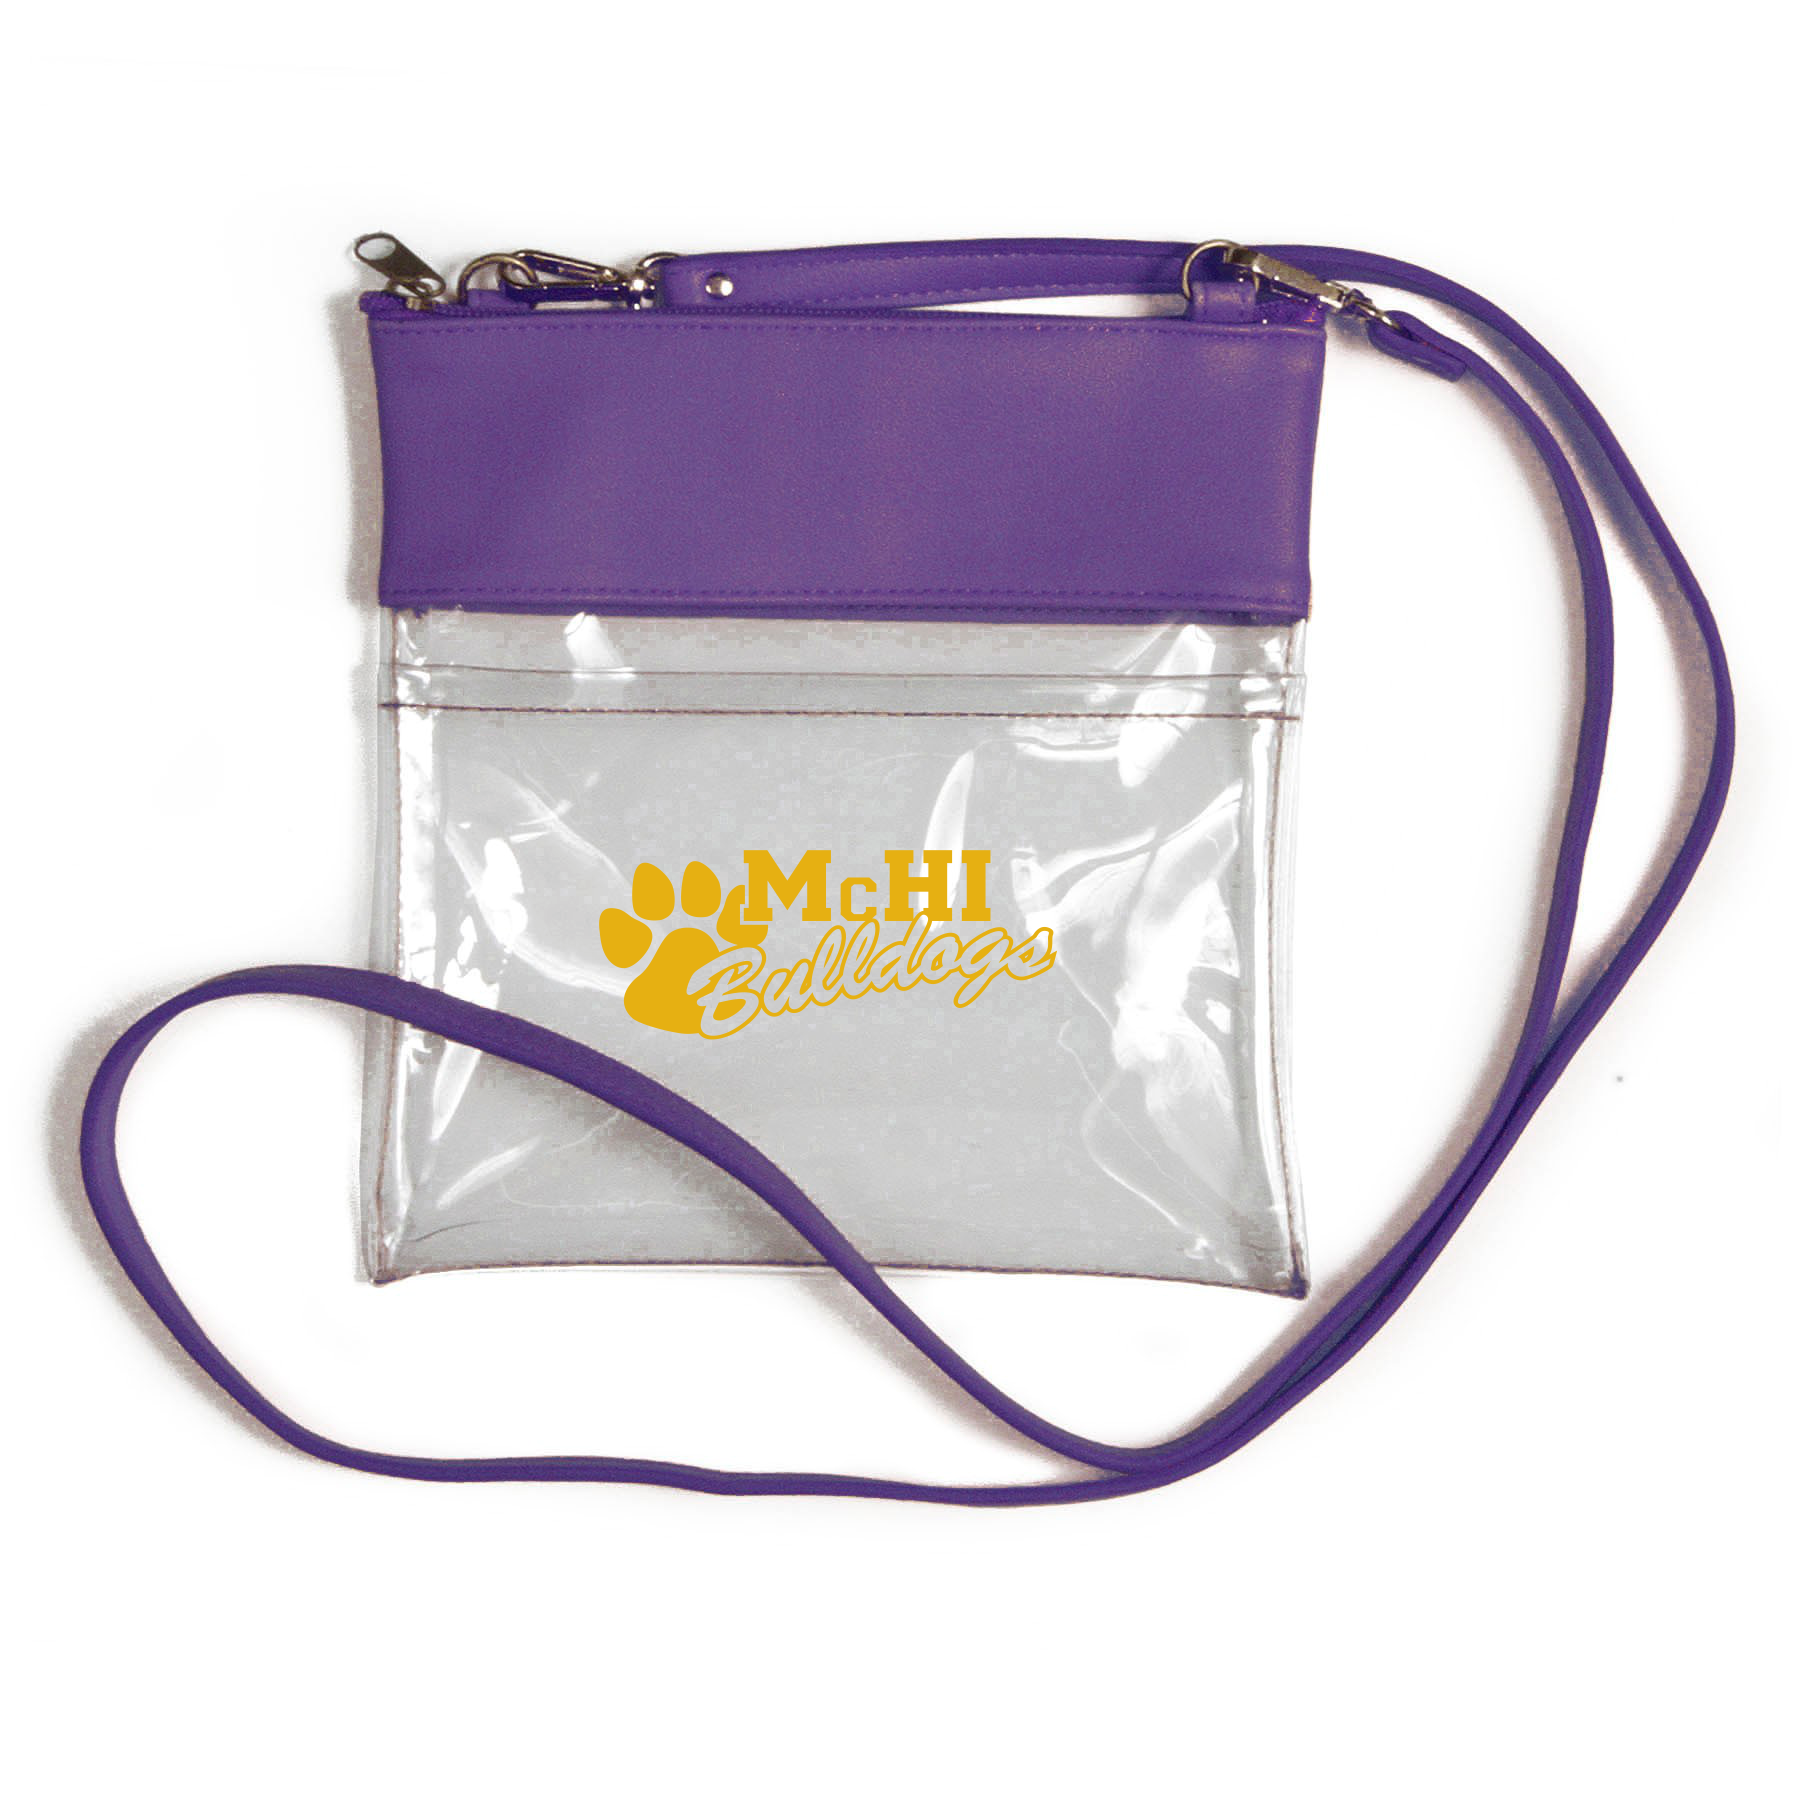 Buy Vorspack Clear Bag Stadium Approved Clear Concert Purse with Inner  Pocket at Amazon.in